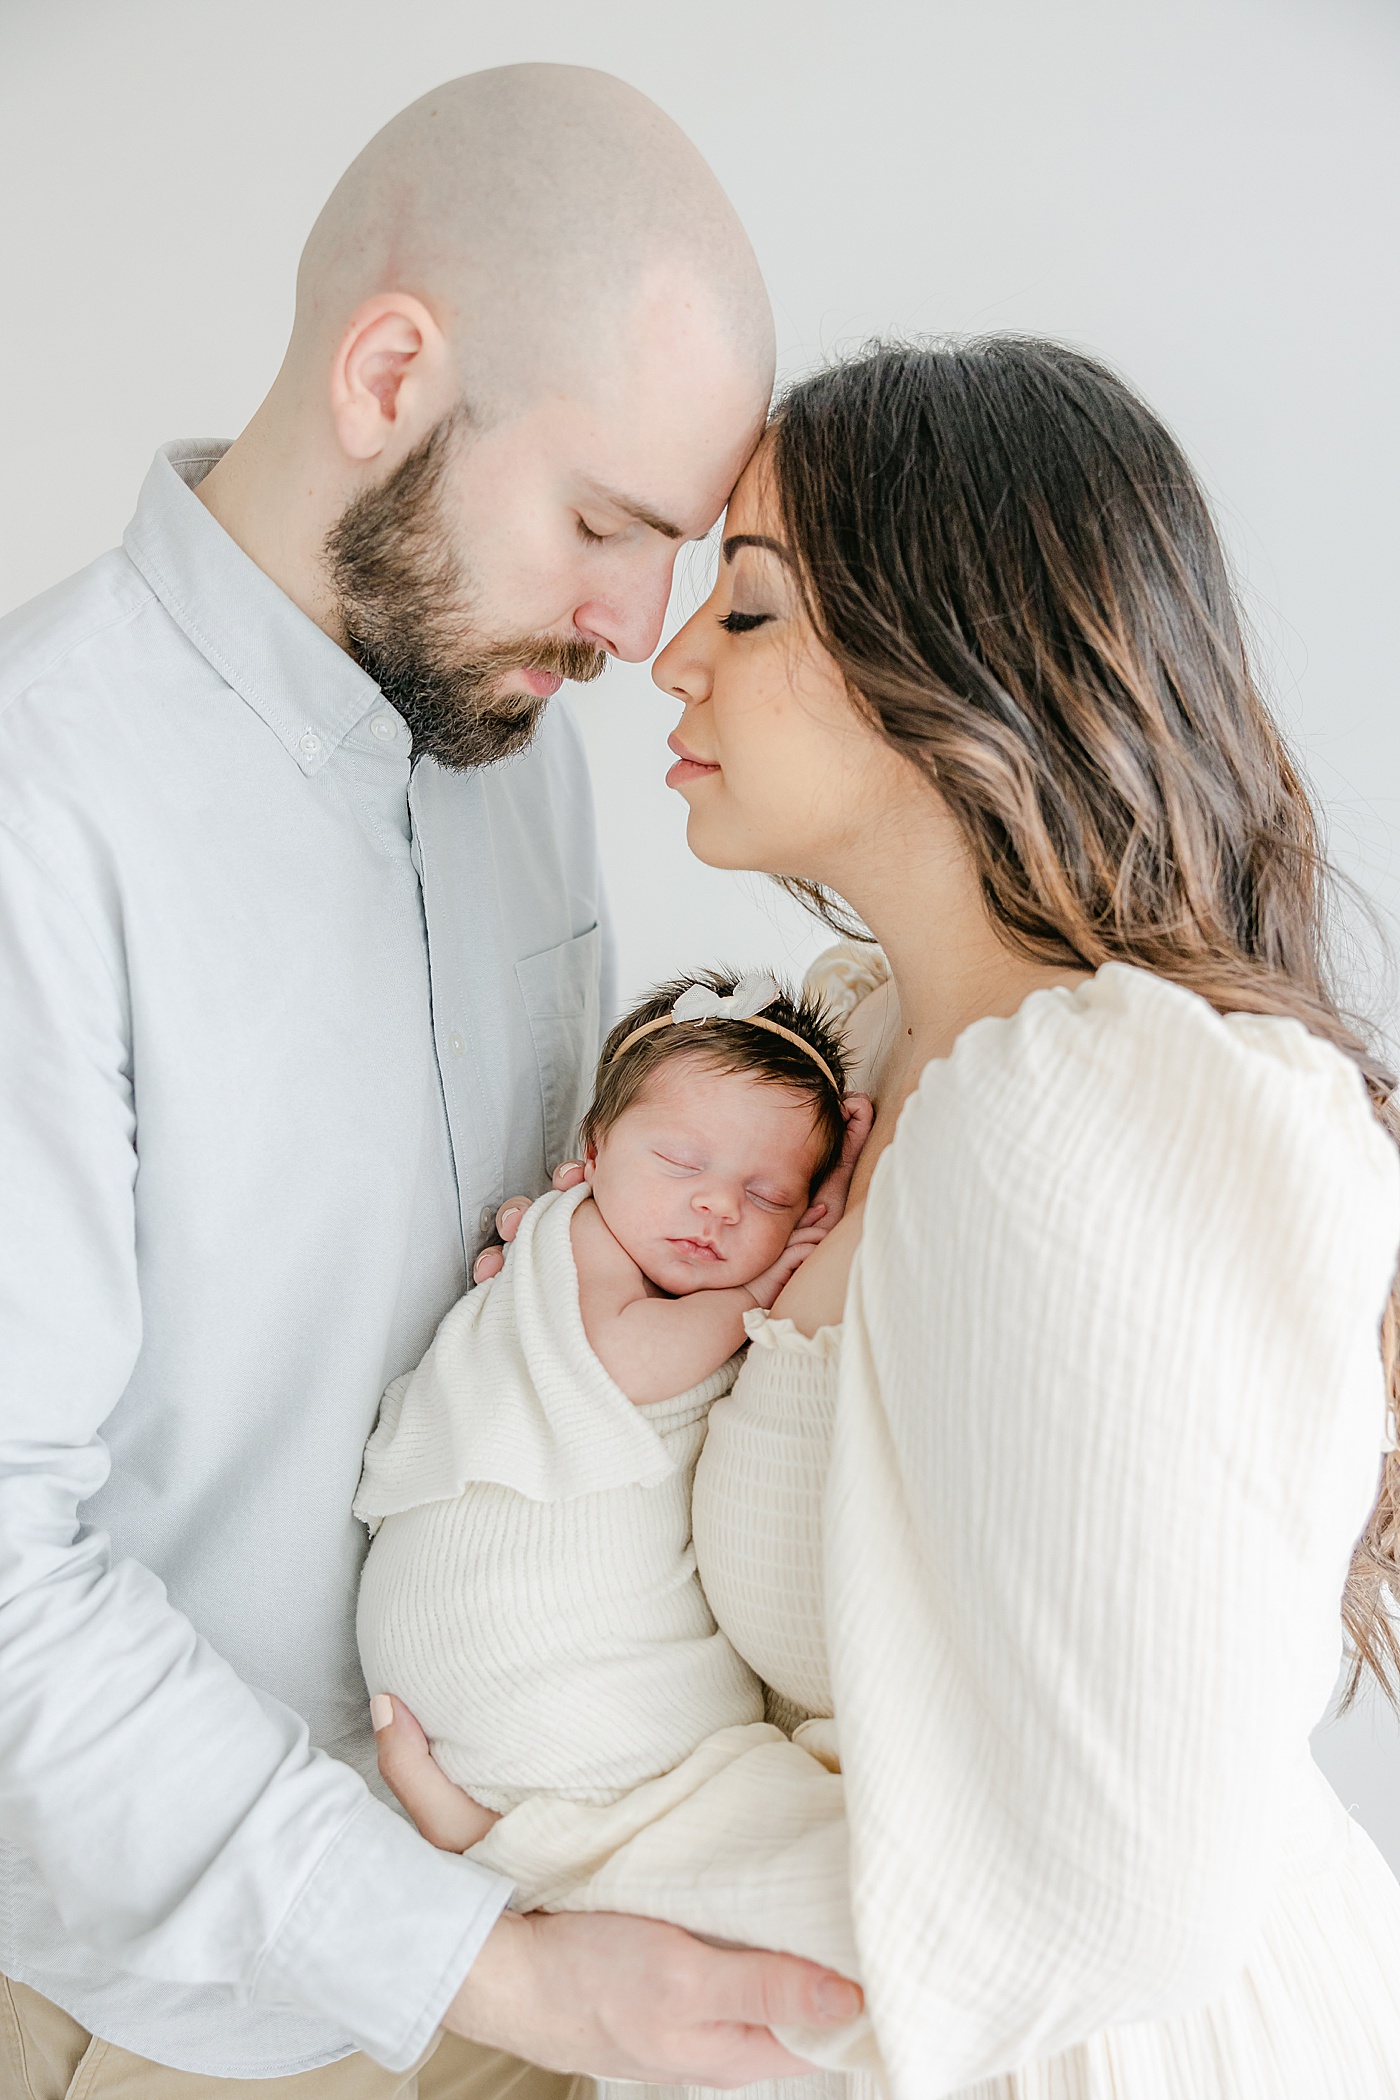 Mom and Dad share sweet moment while holding baby girl during newborn photos with Kristin Wood Photography.